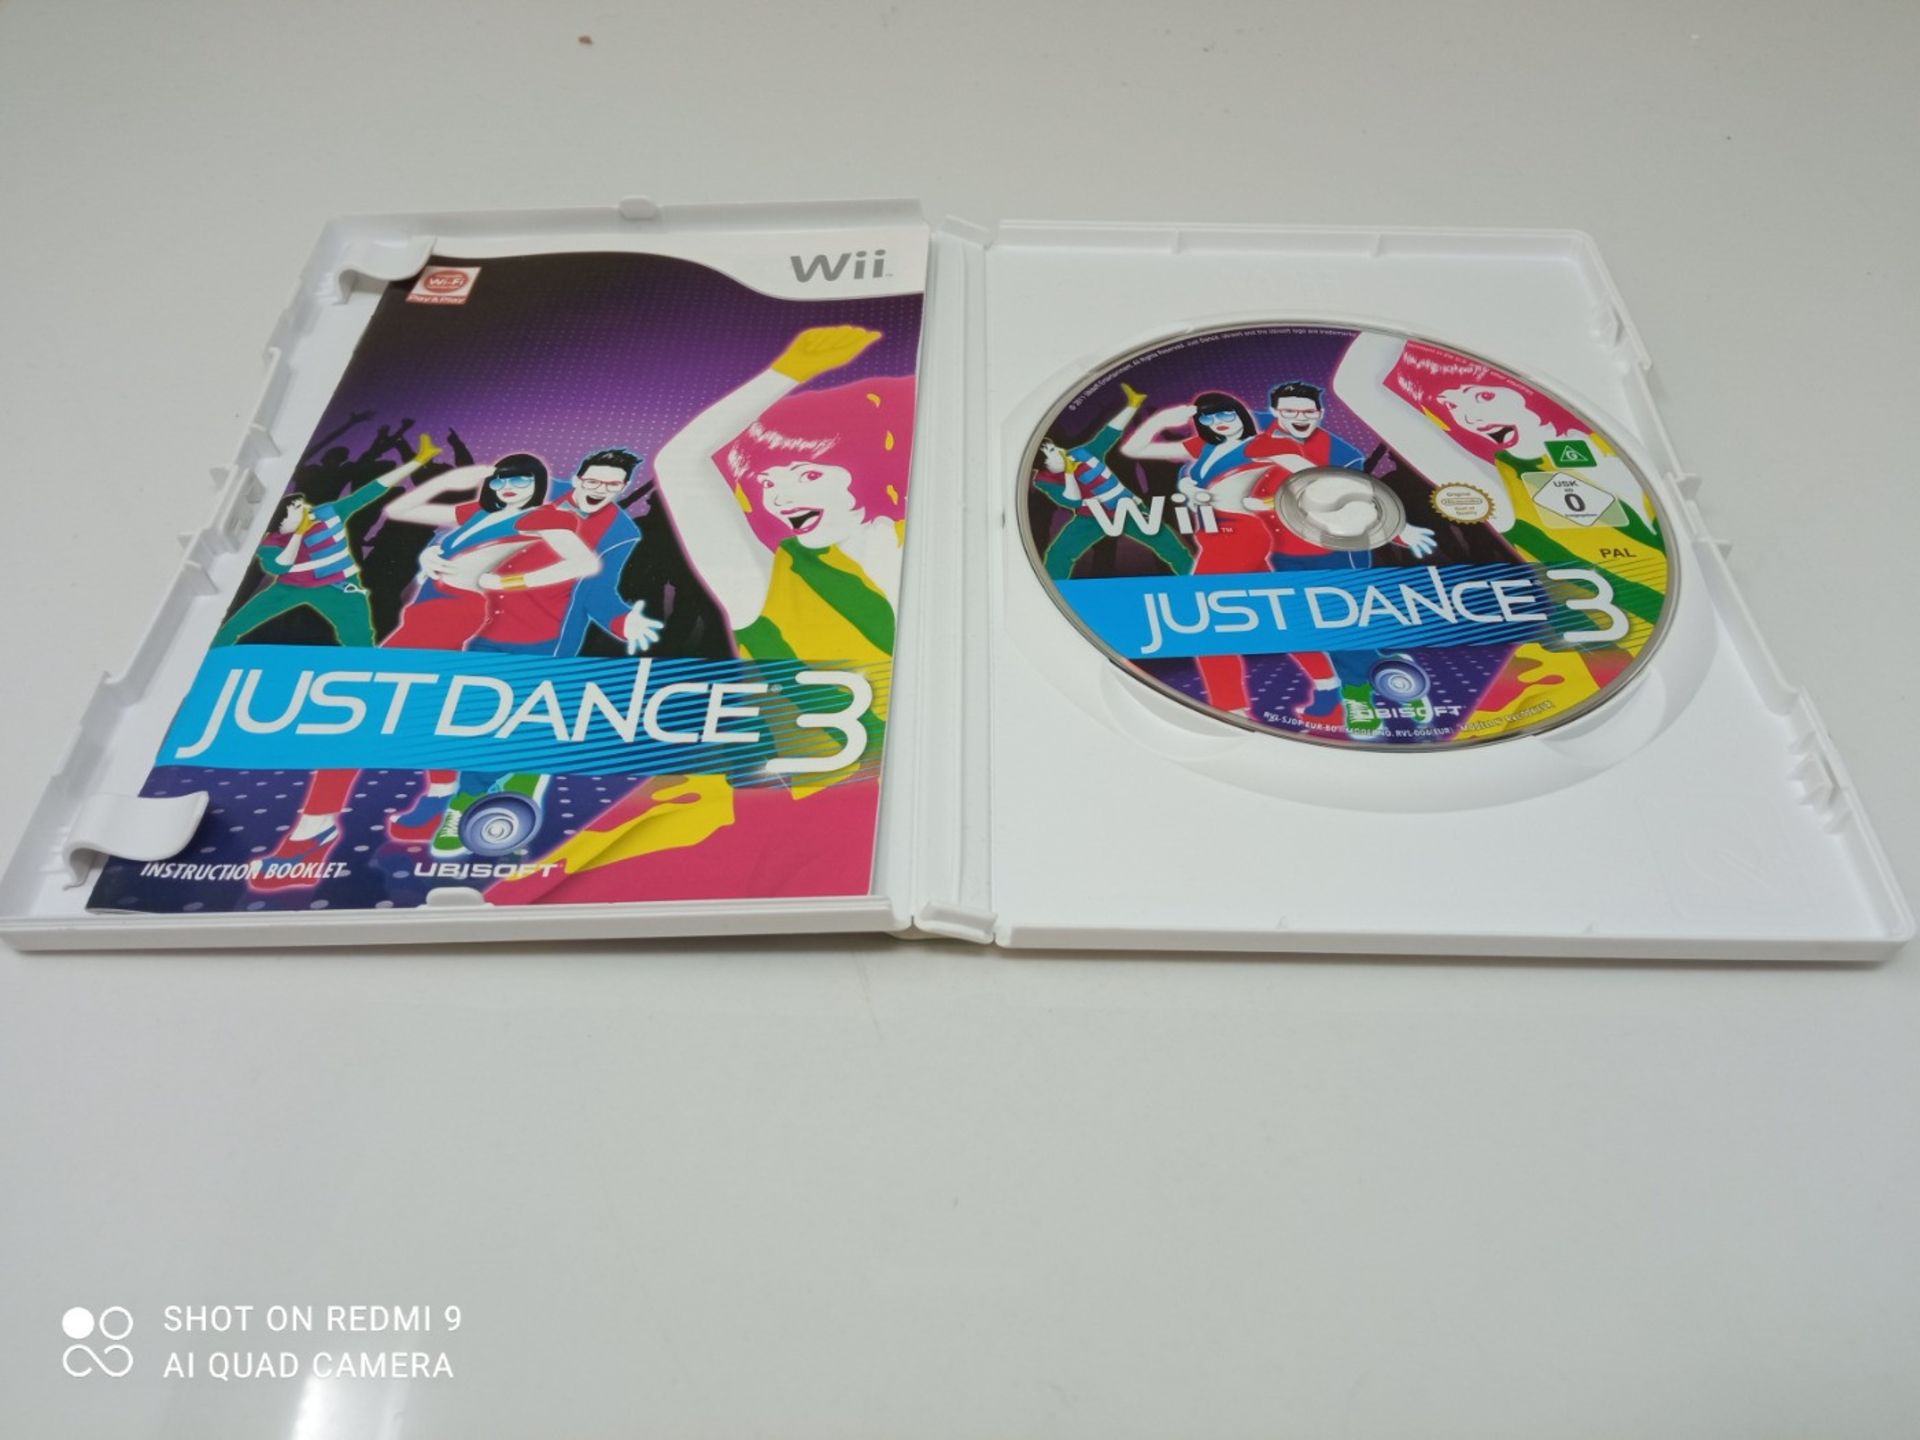 Just Dance 3 (Wii) - Image 3 of 3